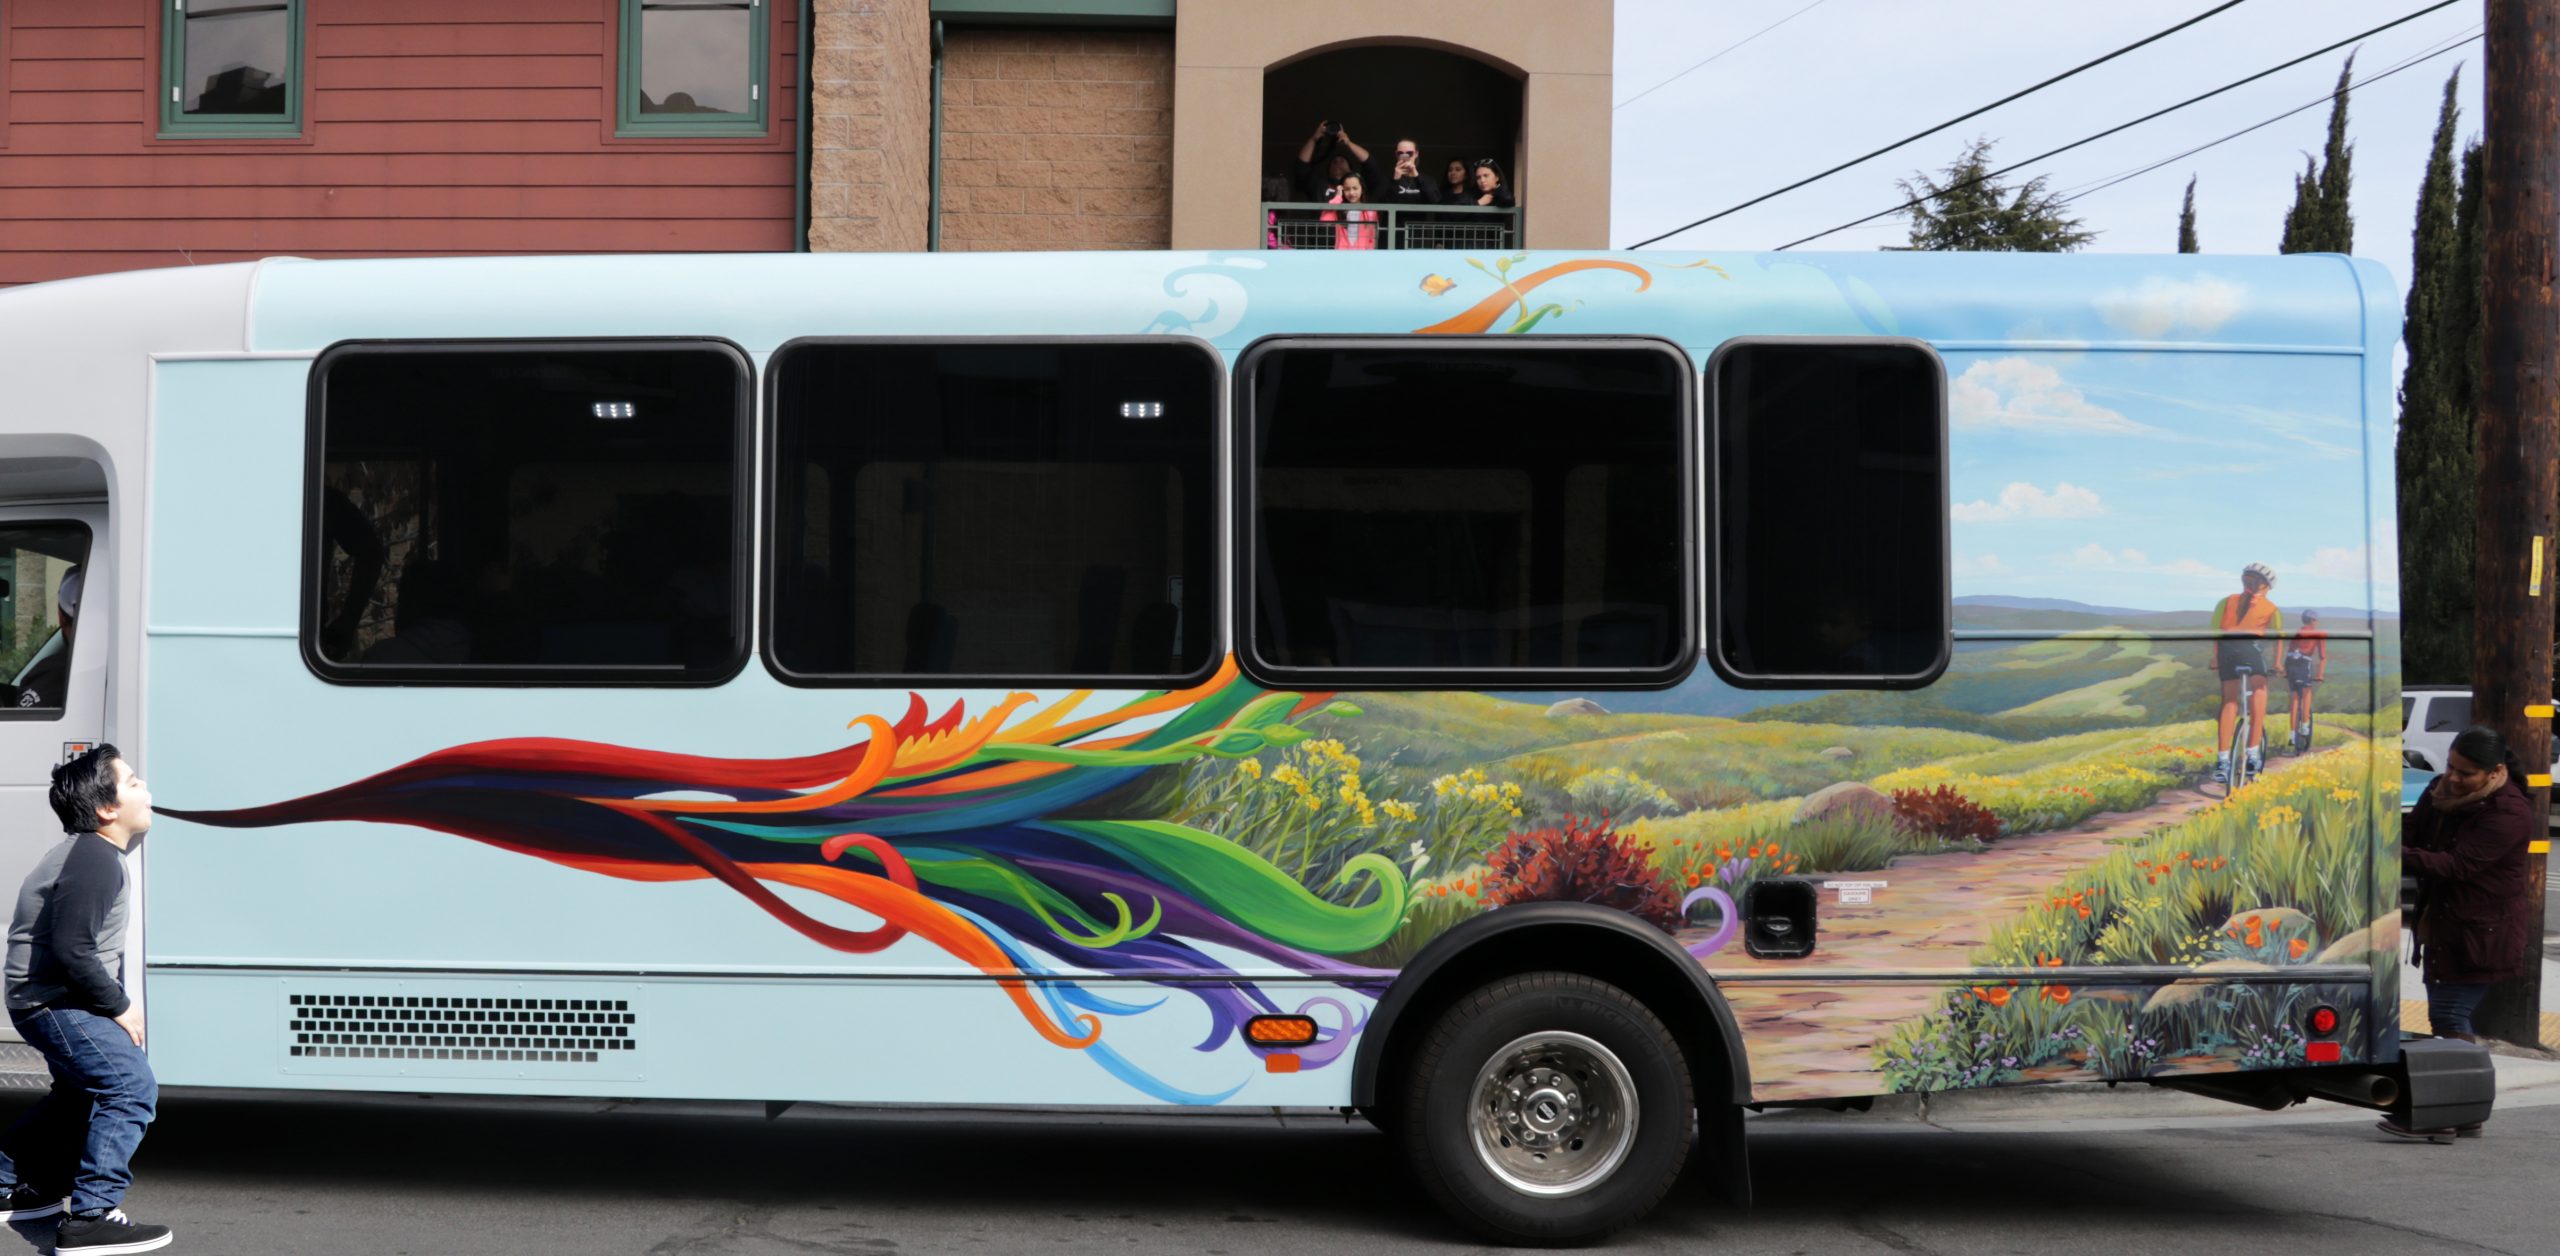 Bus Painting for Siena Youth Center by Mural Artist Morgan Bricca